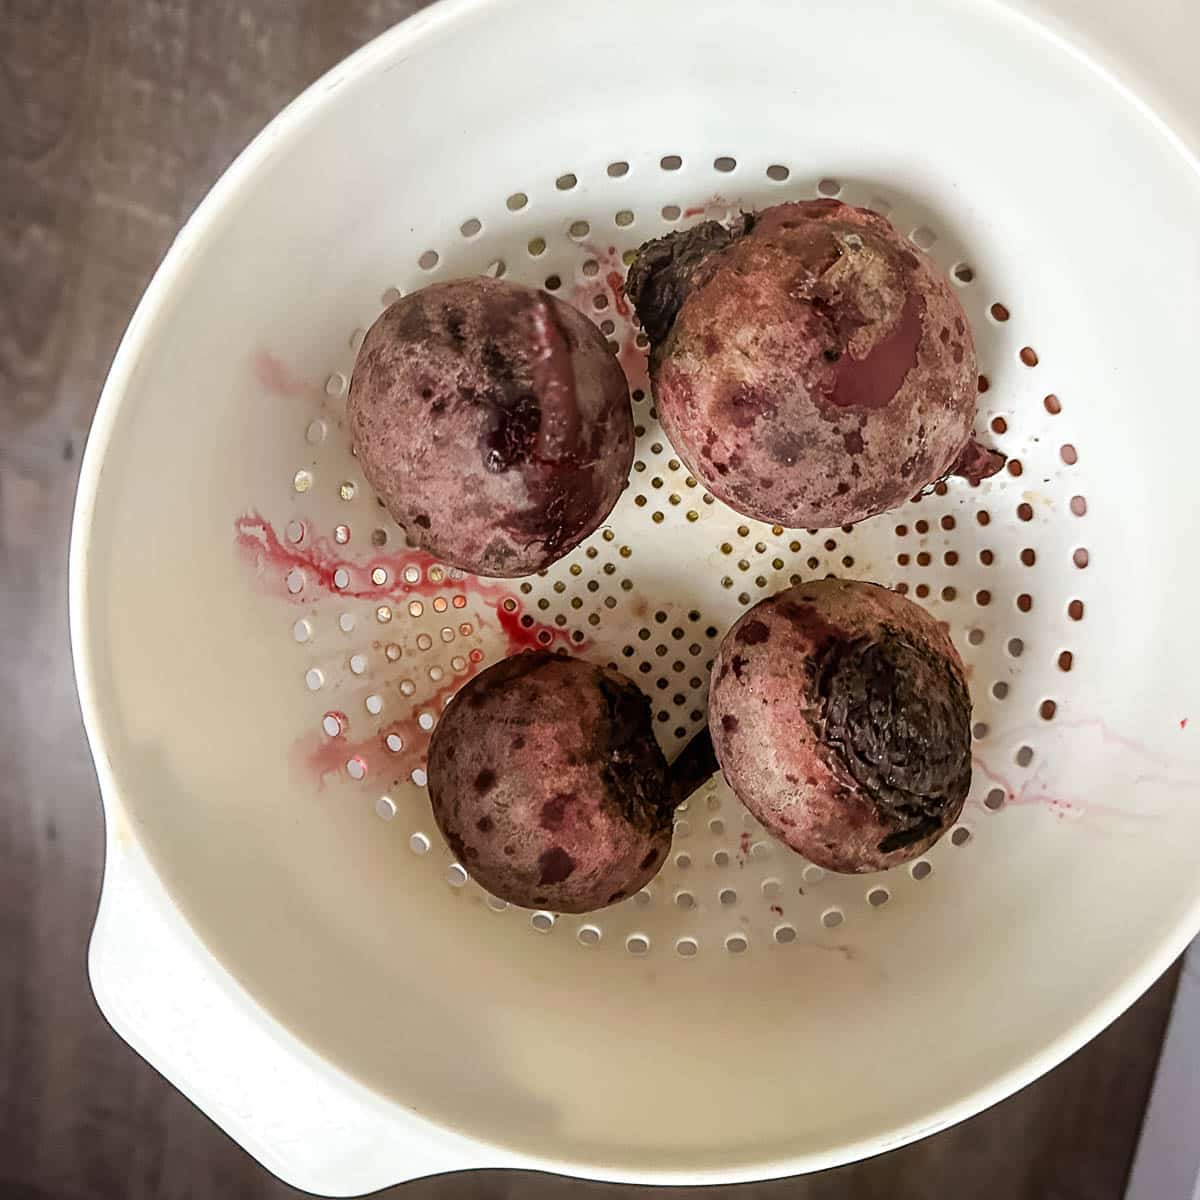 boiled beets sit in a white colander.